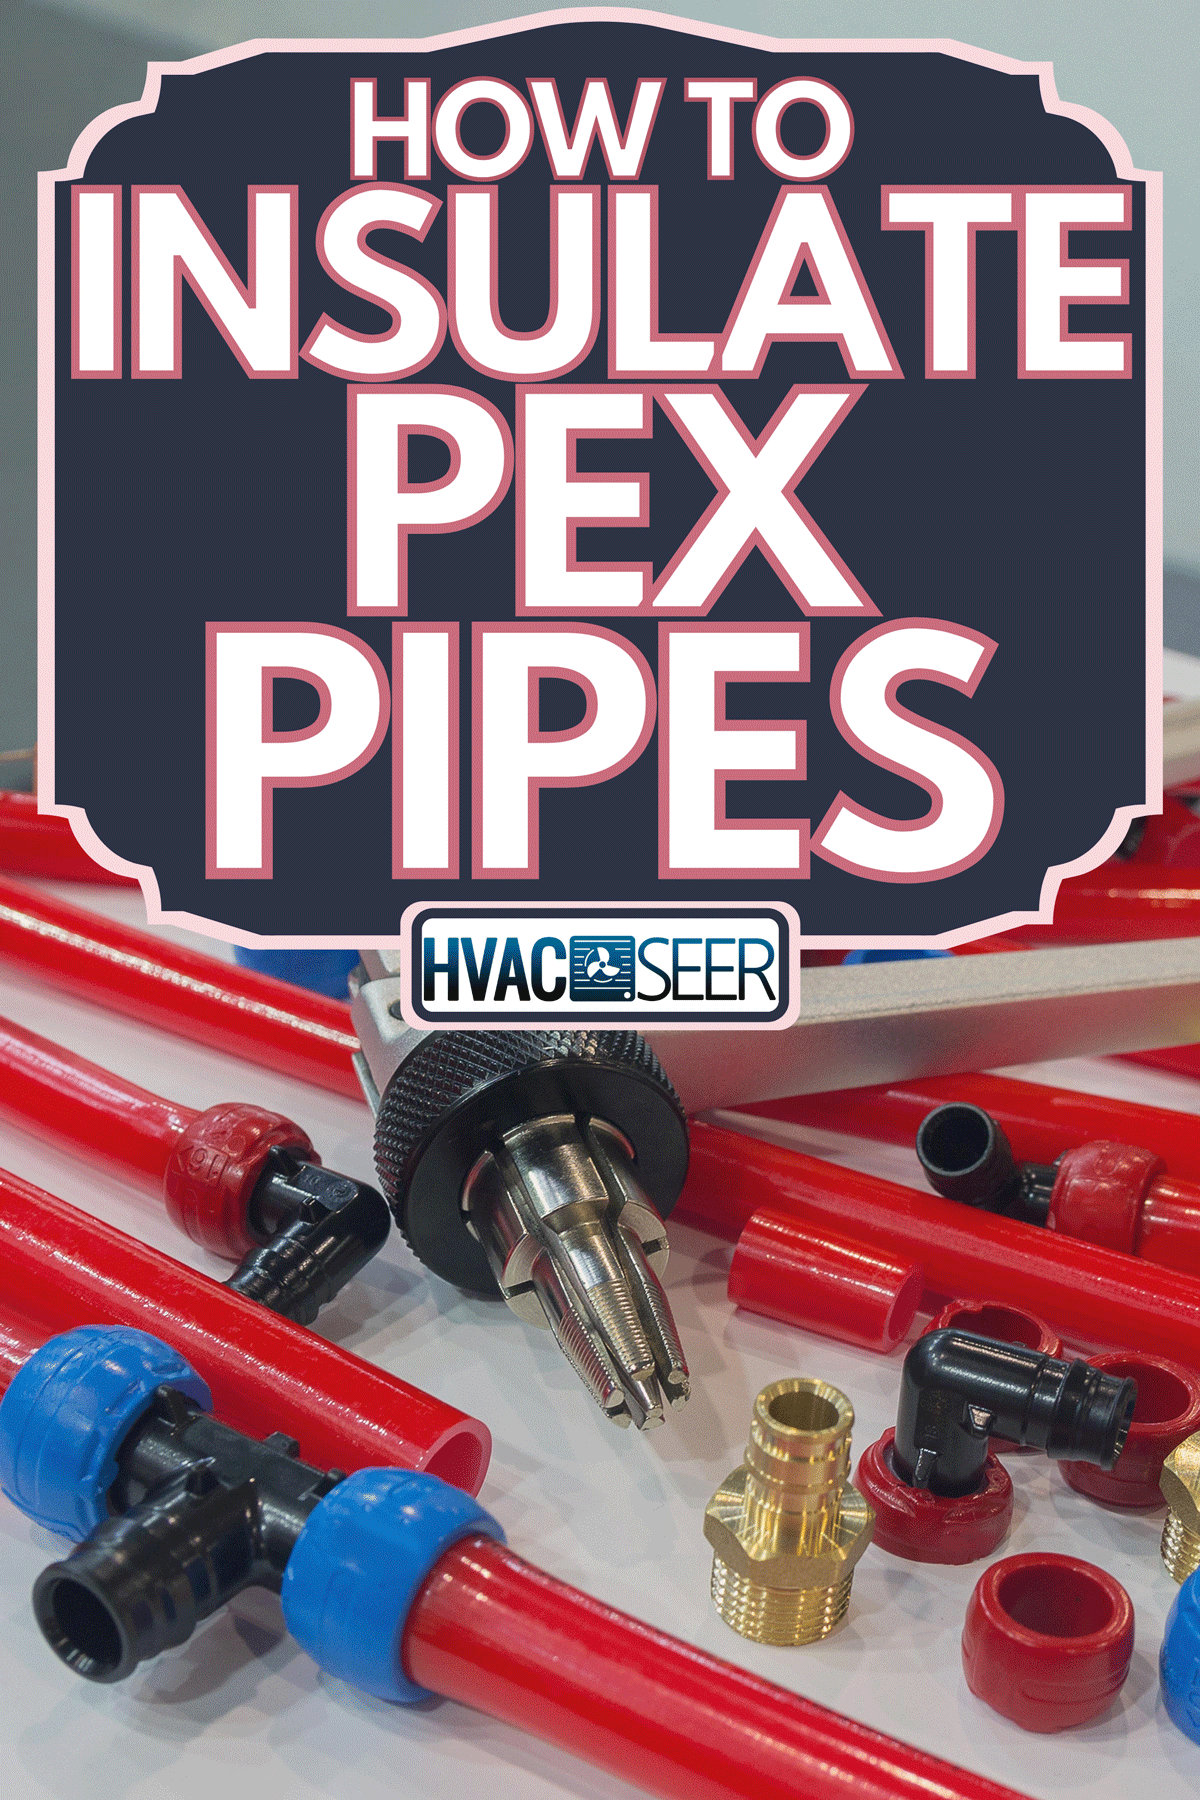 A PEX pipes and mounting tools on the table,How To Insulate PEX Pipes